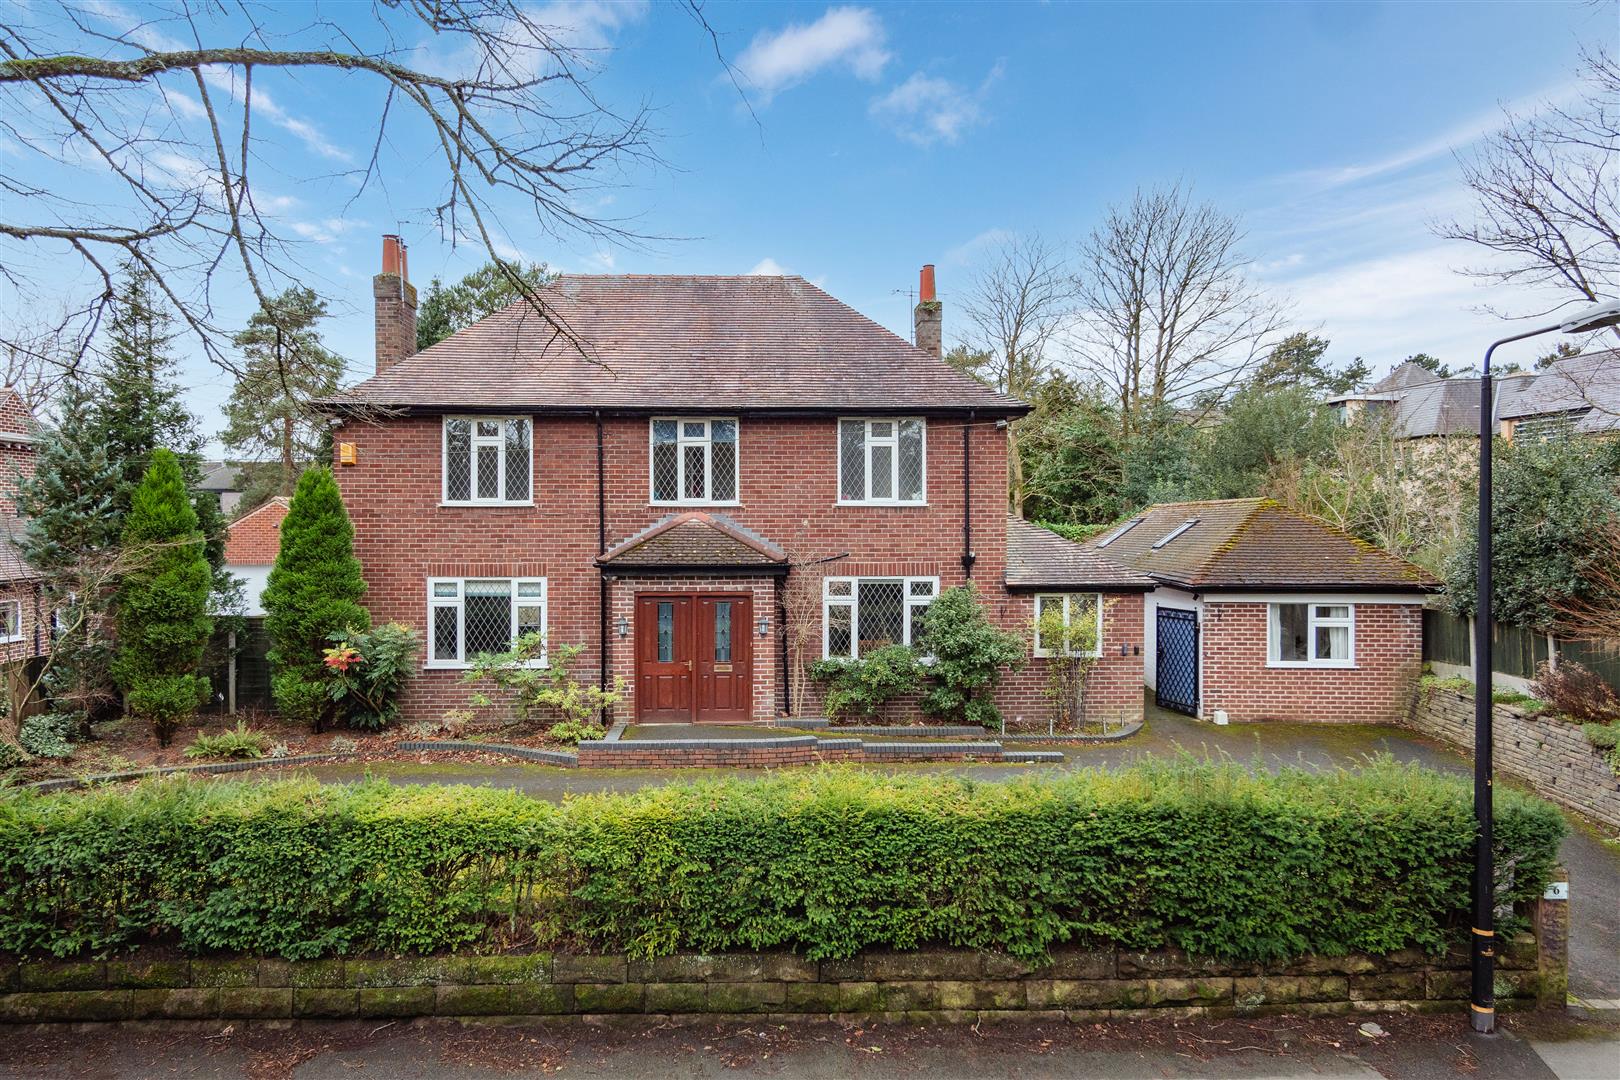 4 bed detached house for sale in Enville Road, Altrincham - Property Image 1